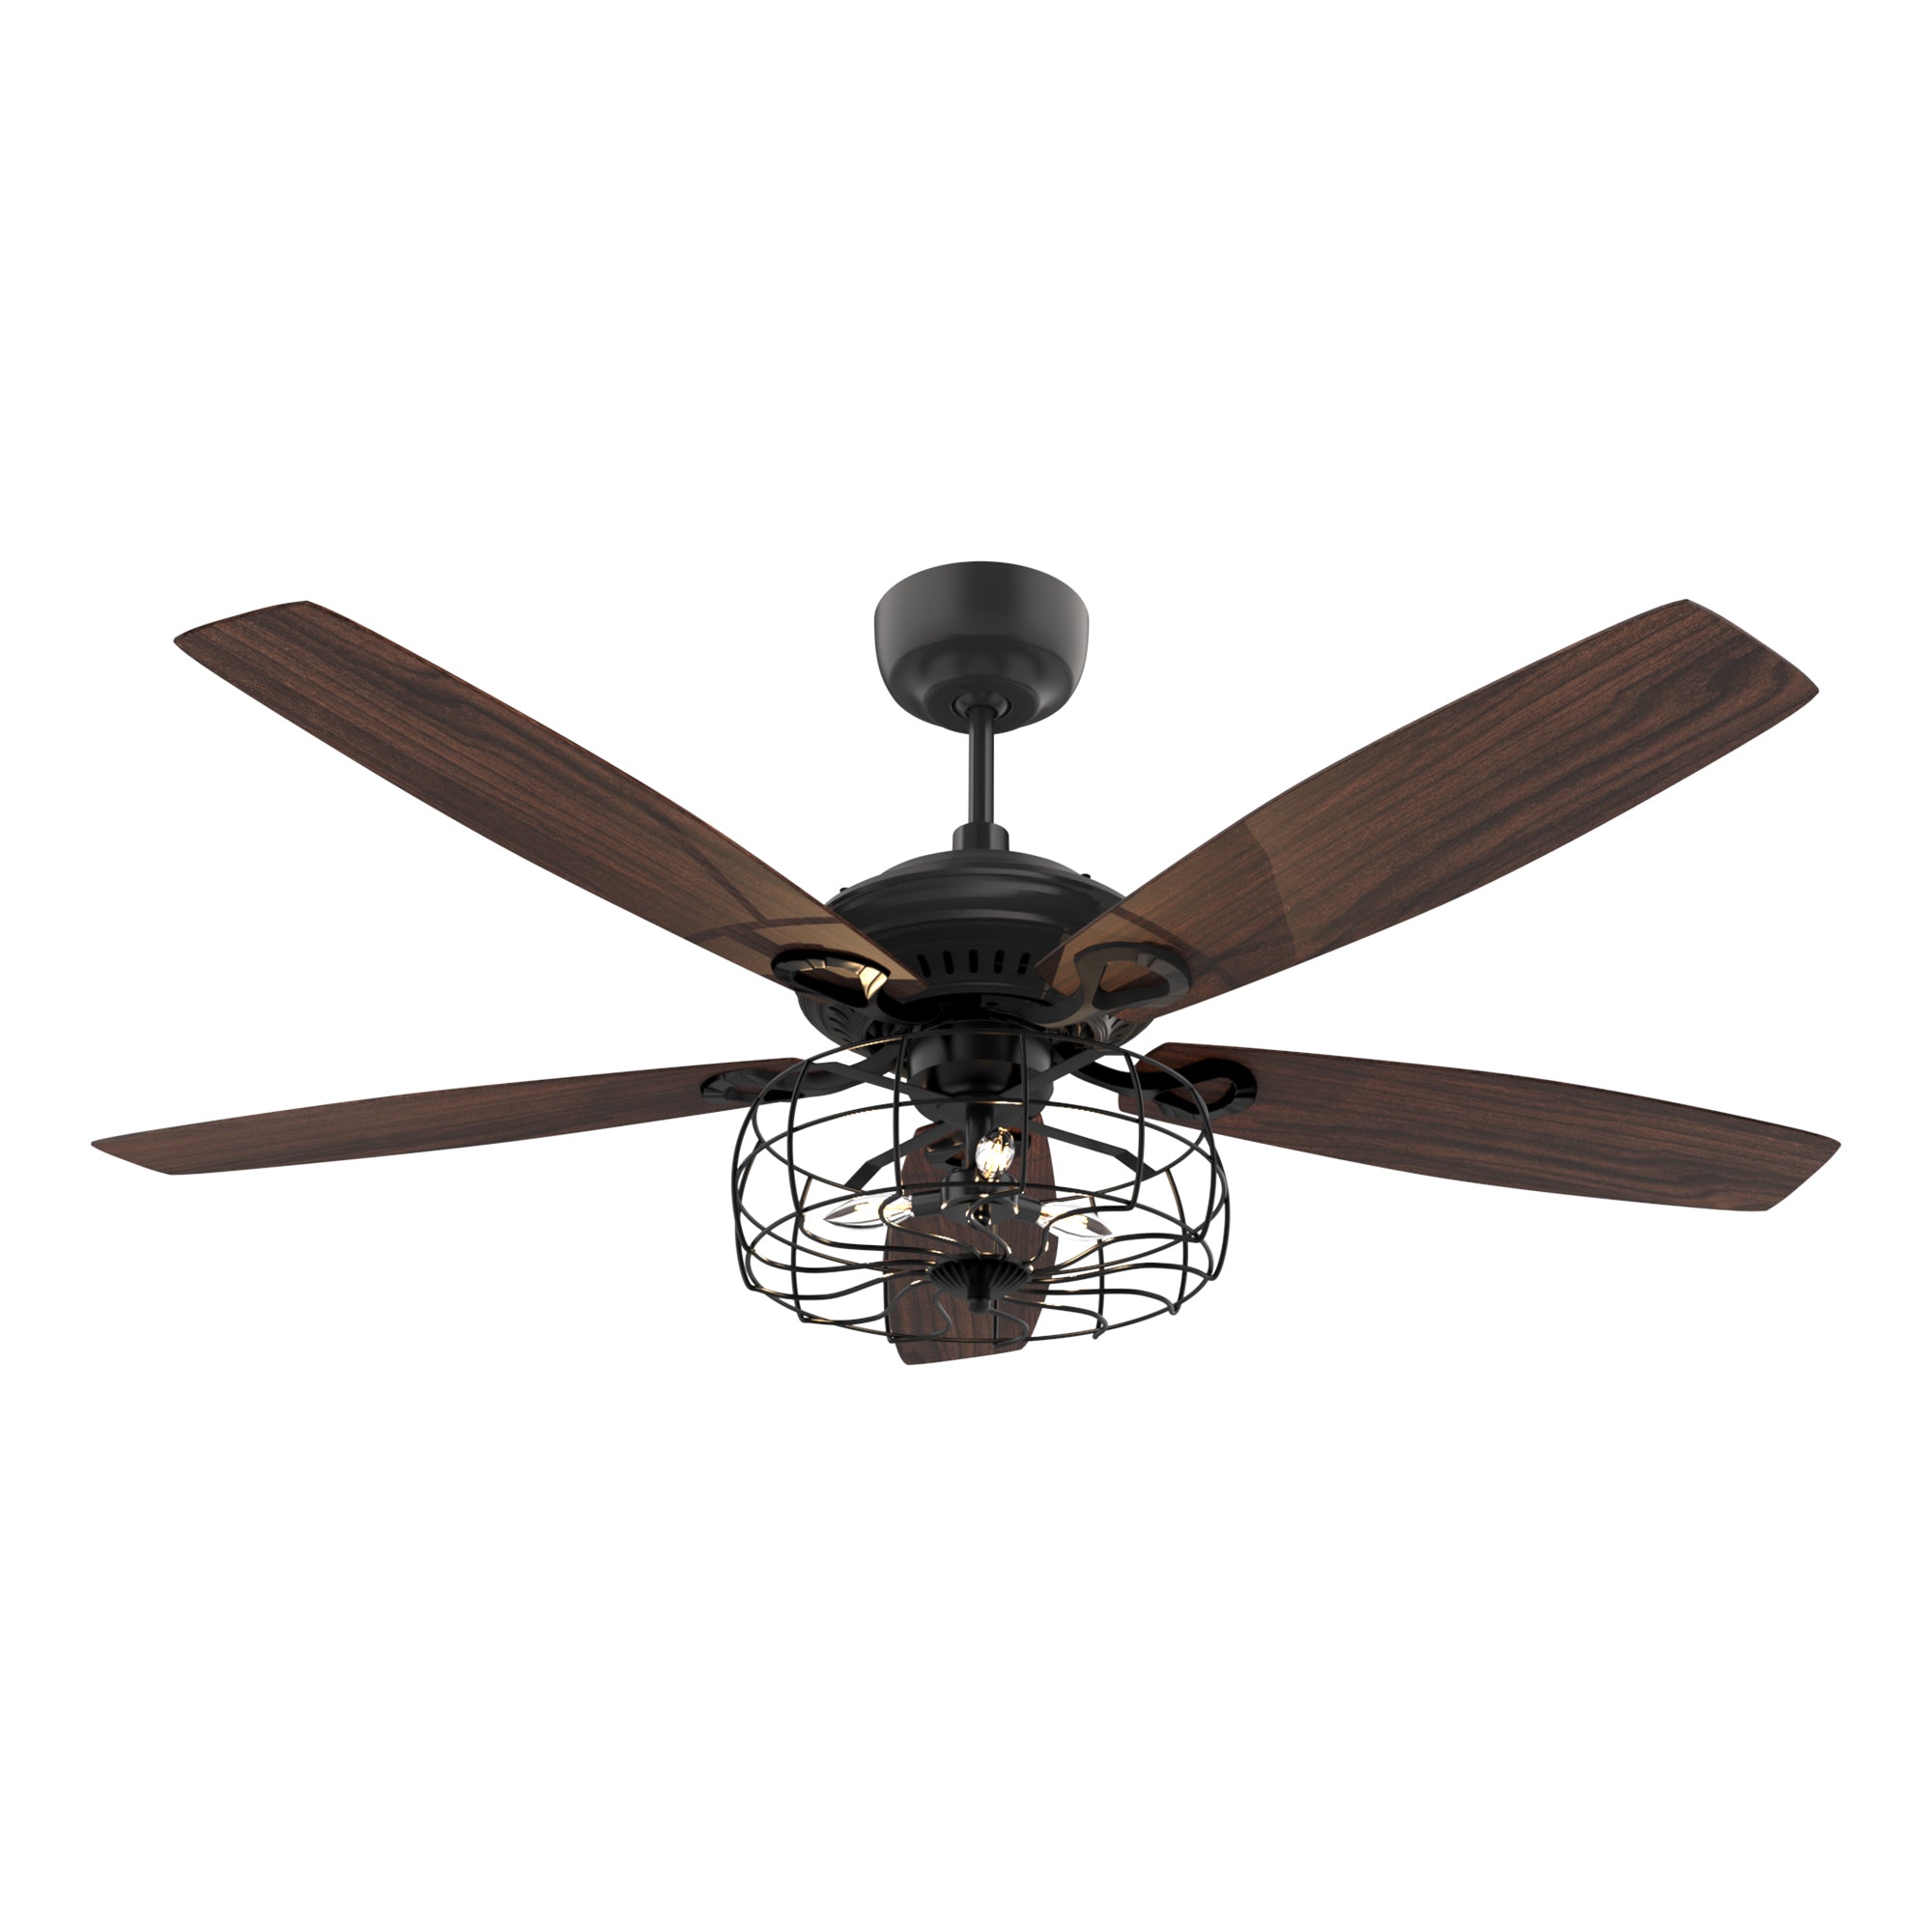 This Smafan Norden 52 inch Industrial Vintage ceiling fan keeps your space cool, bright, and stylish. It is a soft modern masterpiece perfect for your large indoor living spaces. This modern ceiling fan is a simplicity designing with black finish, use elegant Plywood blades and compatible with LED bulb(Not included). The 10-speed ceiling fan features remote control. 